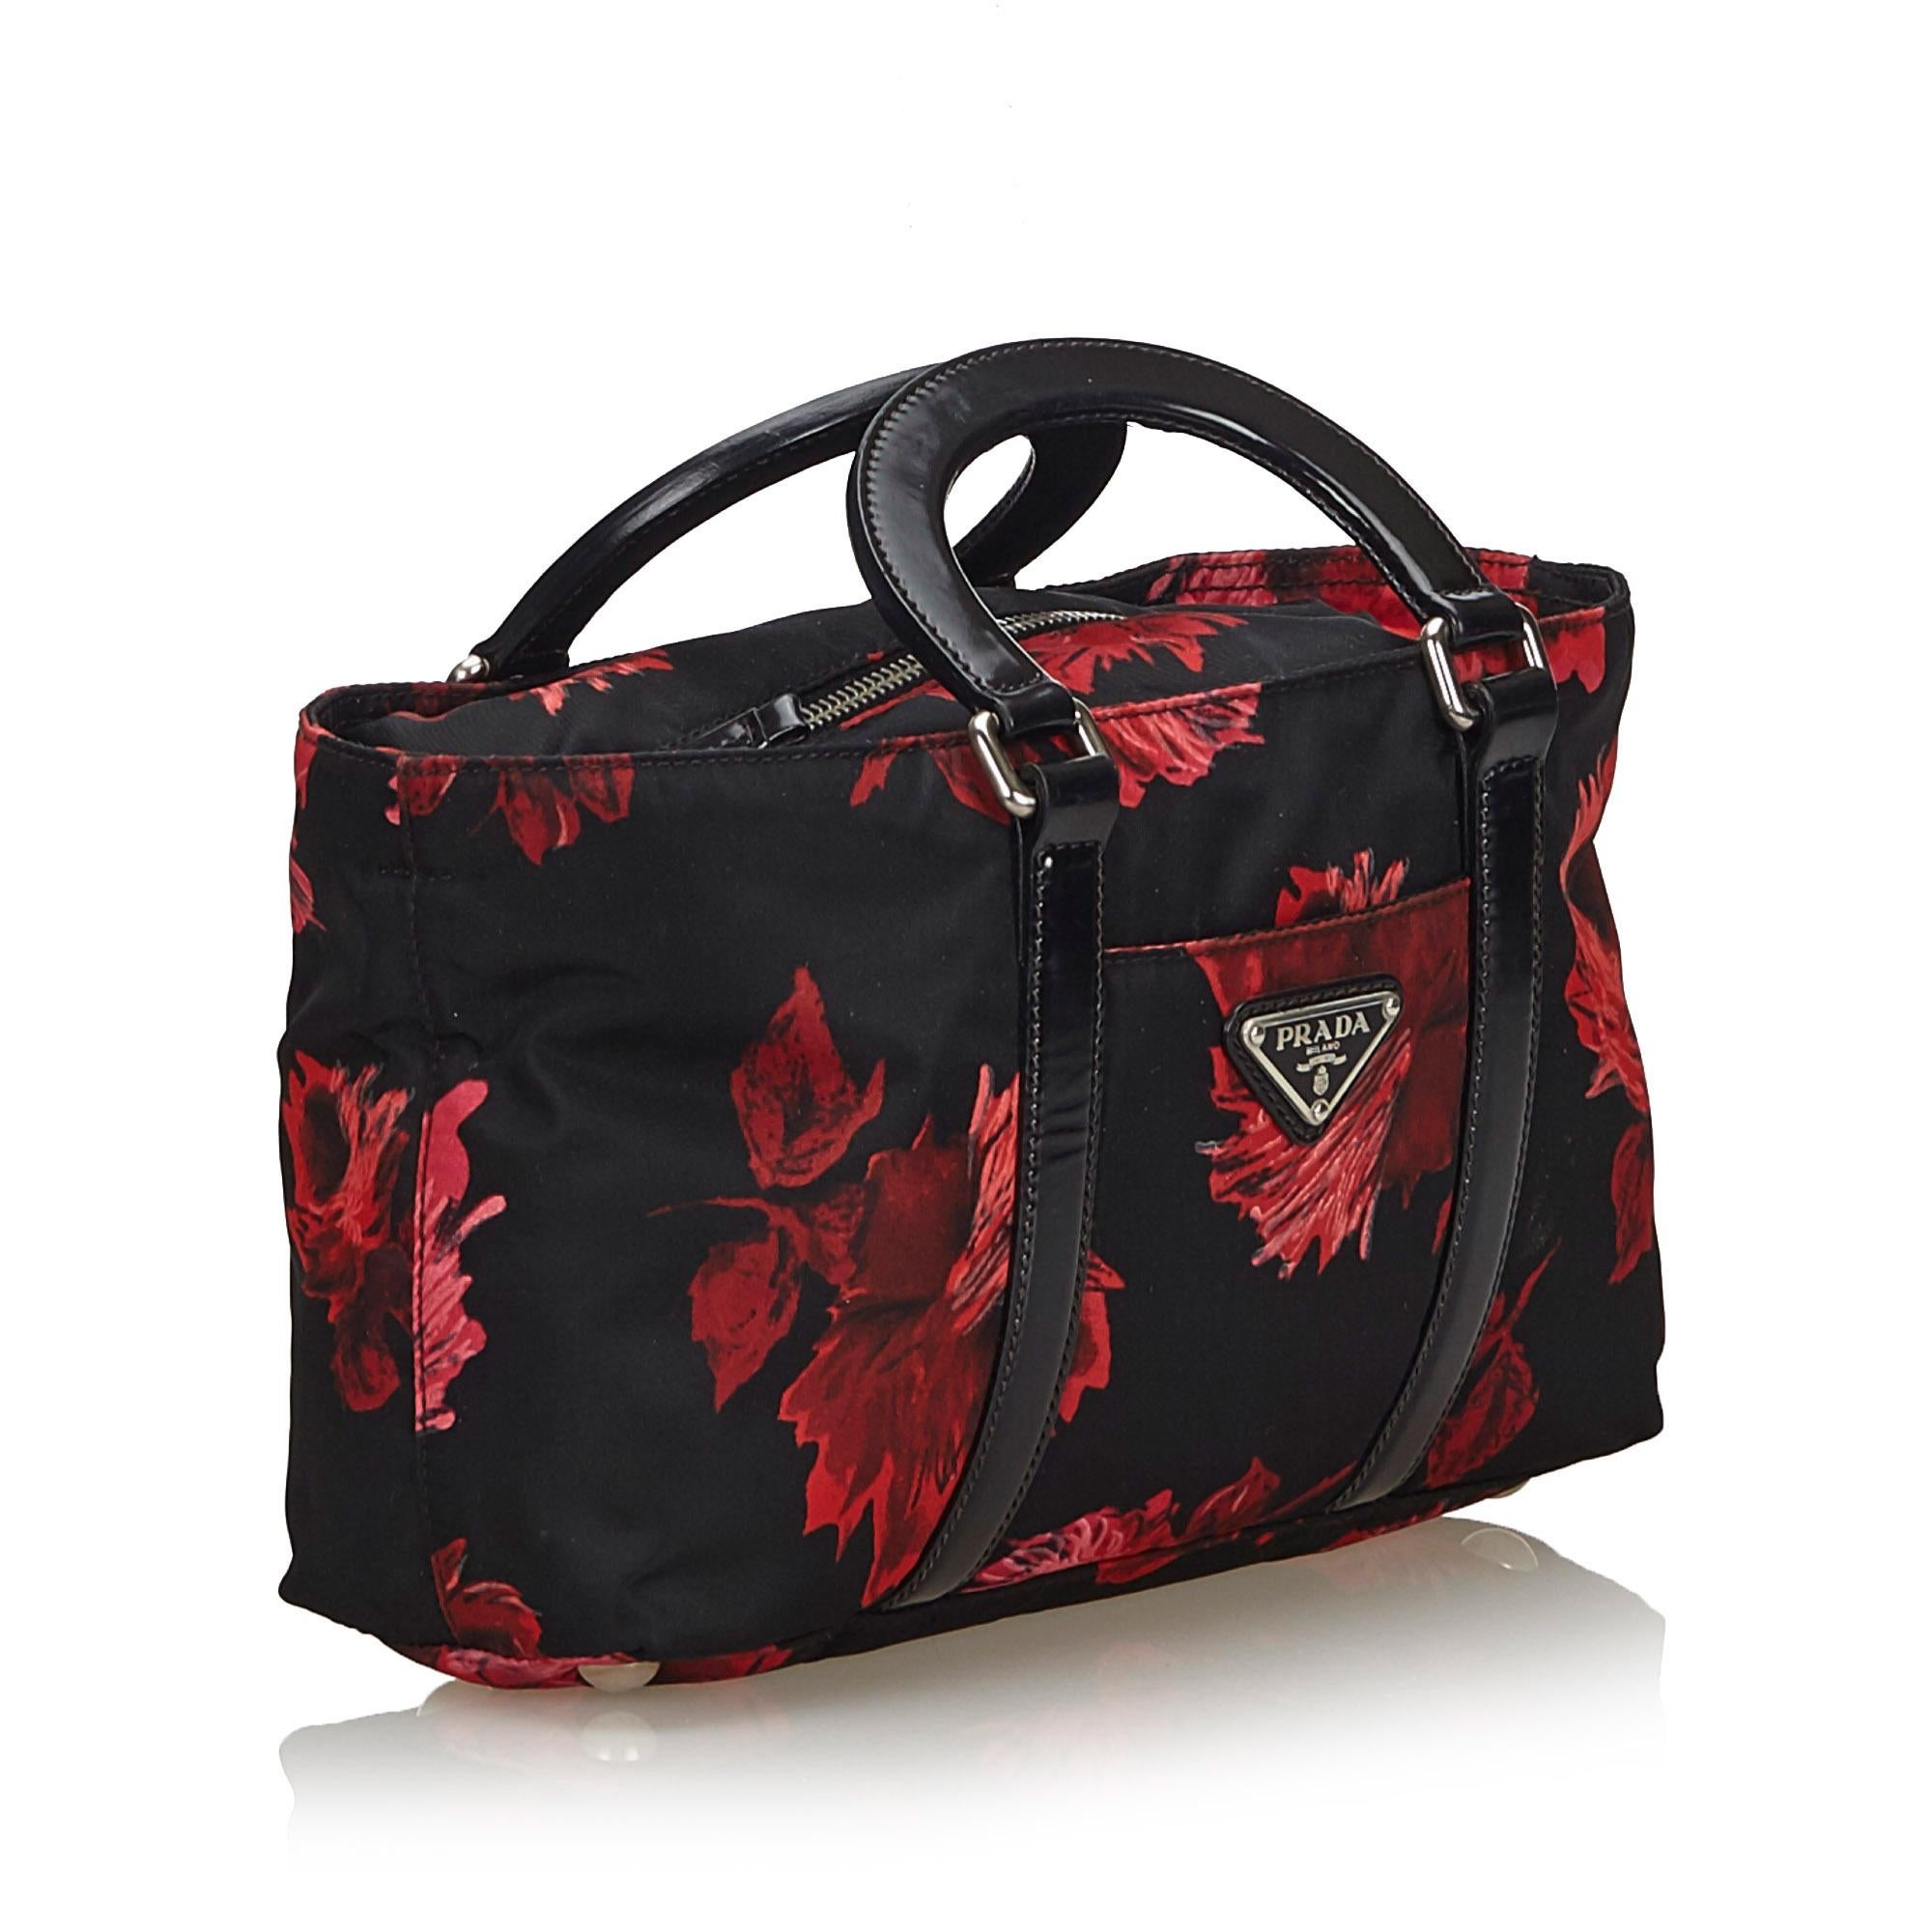 This handbag features a printed nylon body, flat leather handles, a front exterior slip pocket, a top zip closure, and an interior zip pocket. It carries as B+ condition rating.

Inclusions: 
This item does not come with